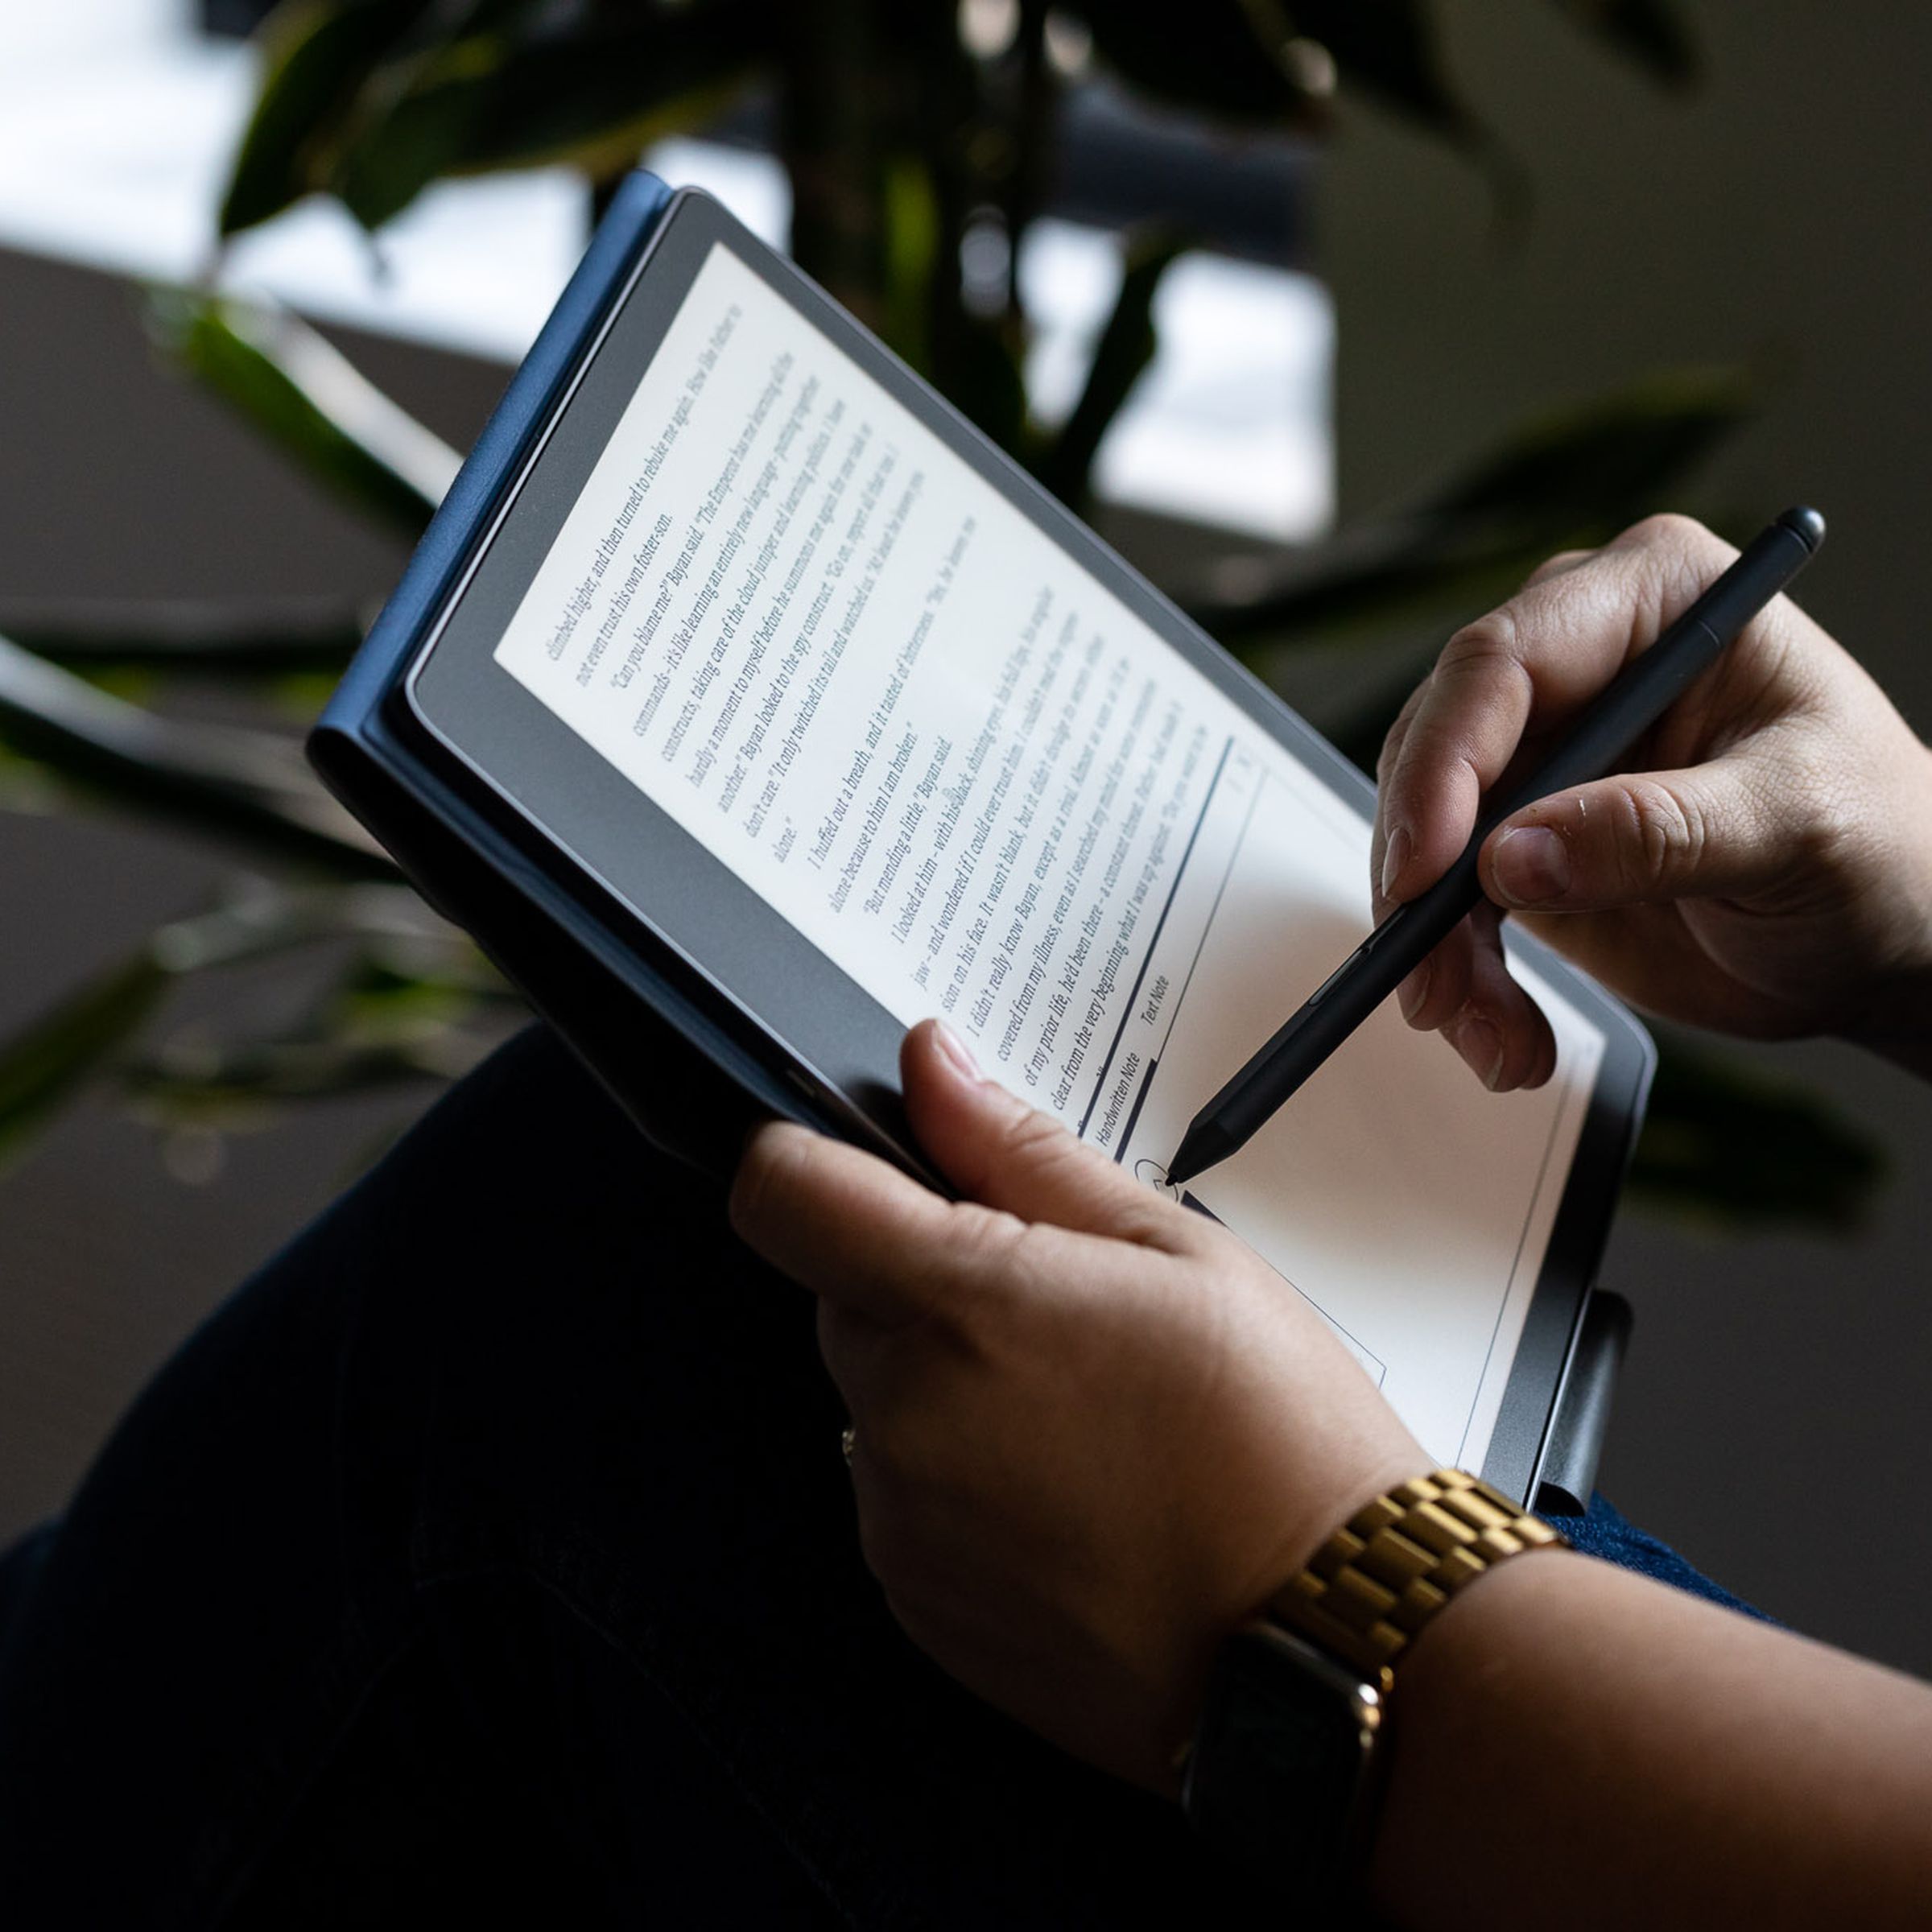 The Kindle Scribe makes it easy to jot down a note while you read a book.